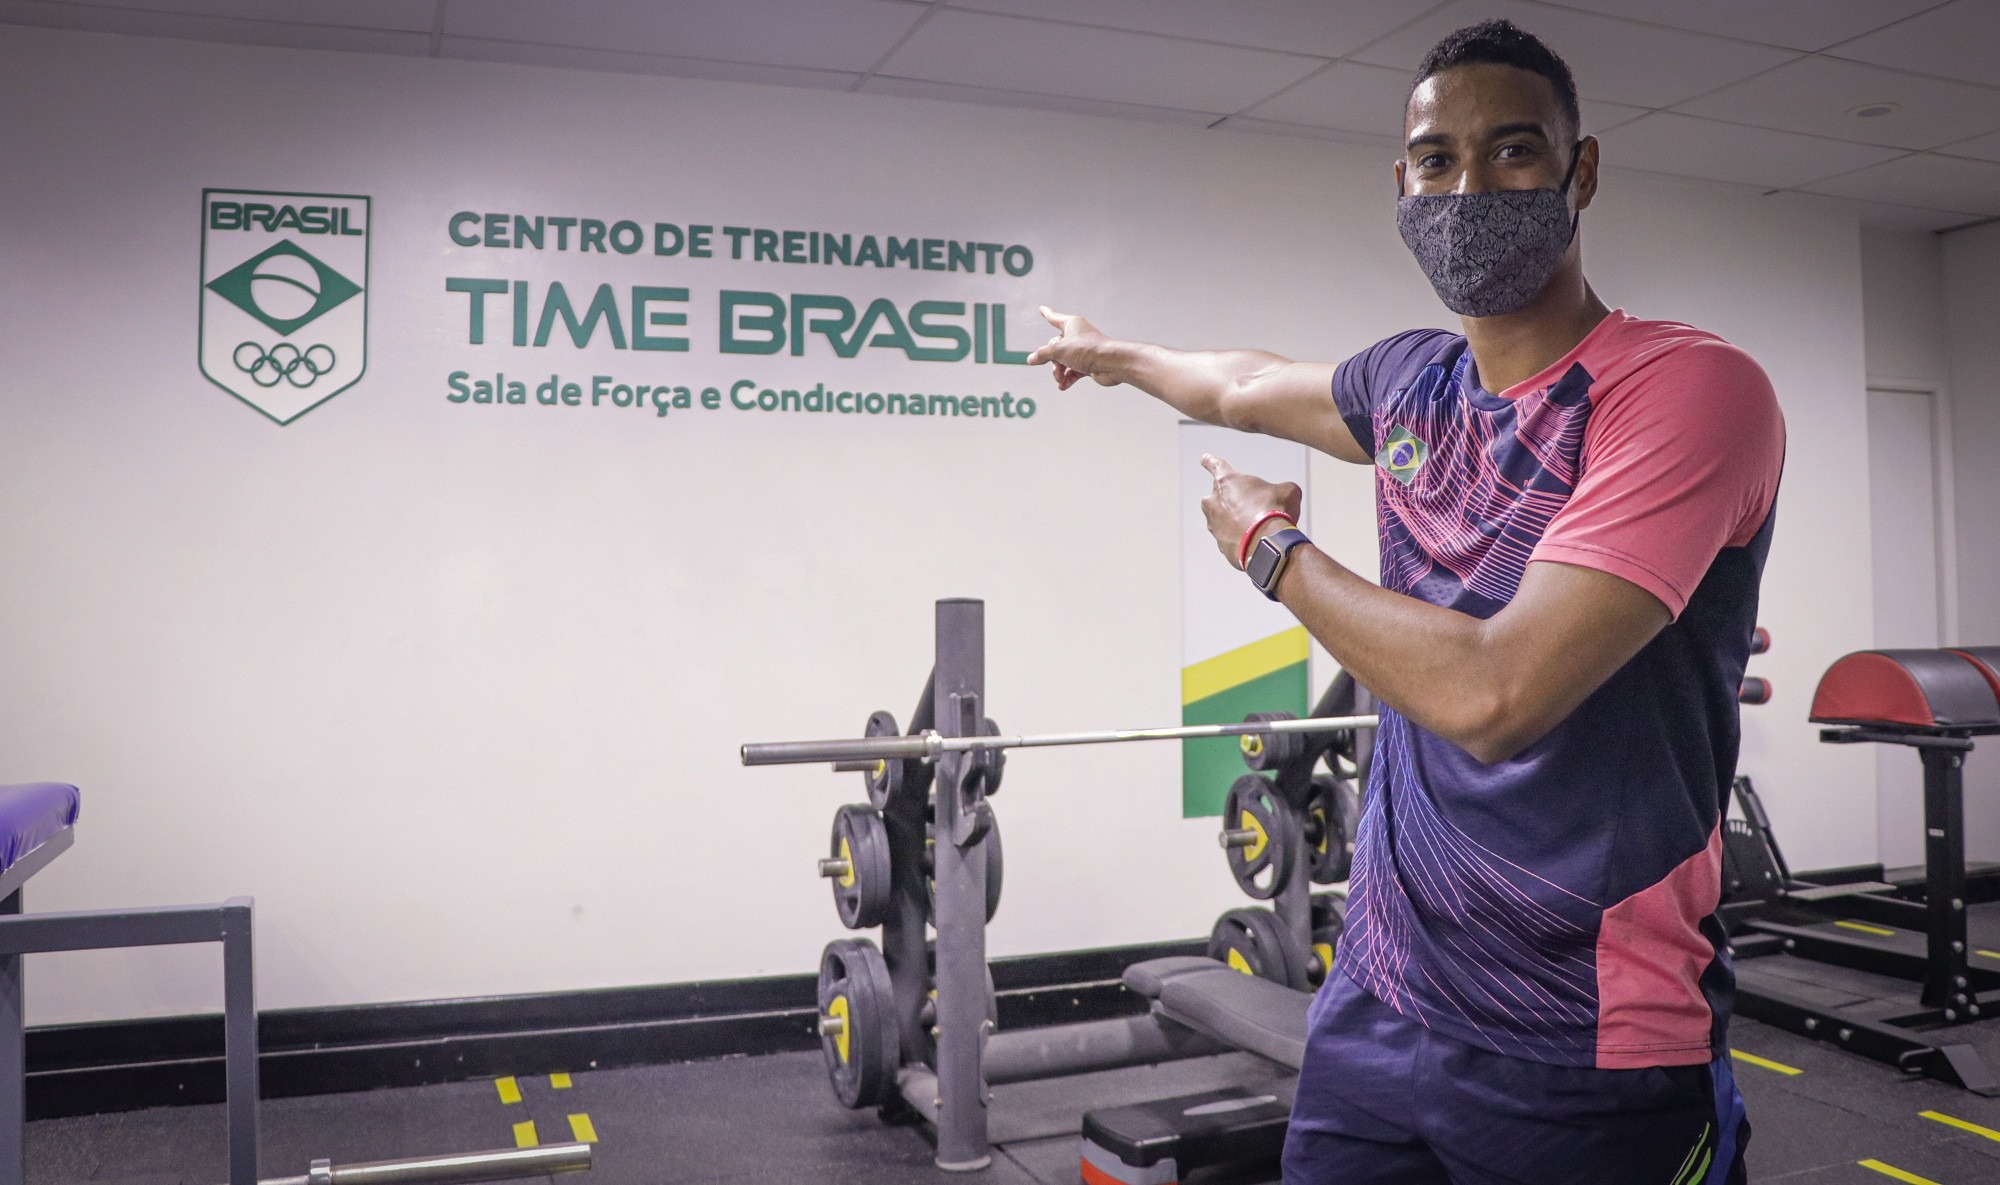 The Brazilian Olympic Committee reopened the Team Brazil Training Centre following the coronavirus pandemic ©COB